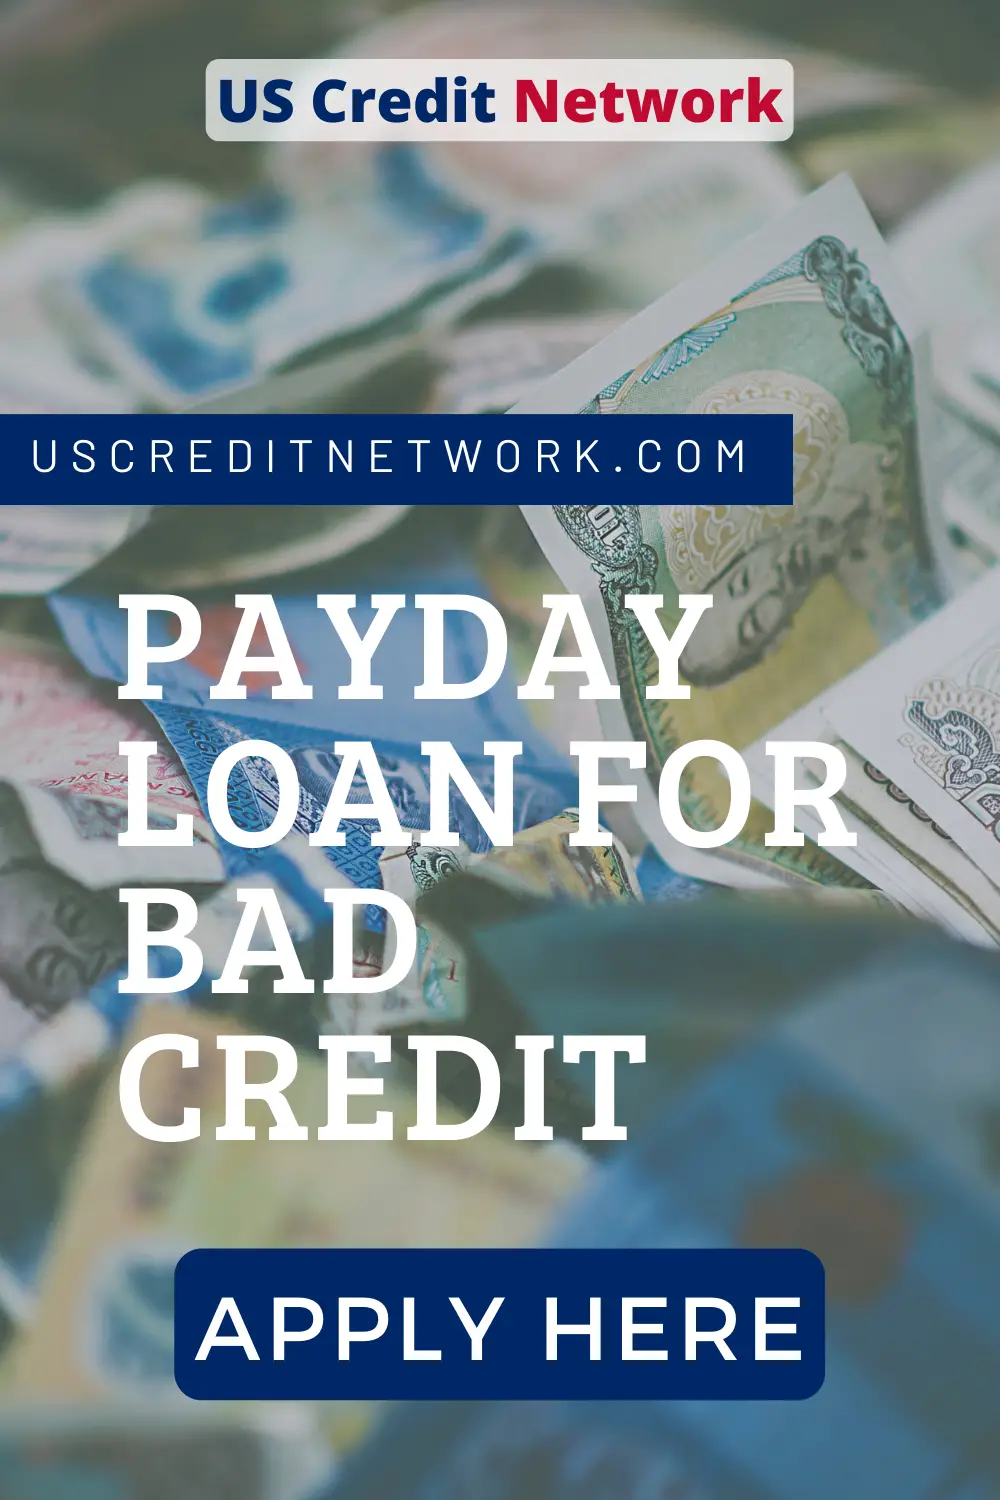 Online Payday Loan for Bad Credit by US Credit Network